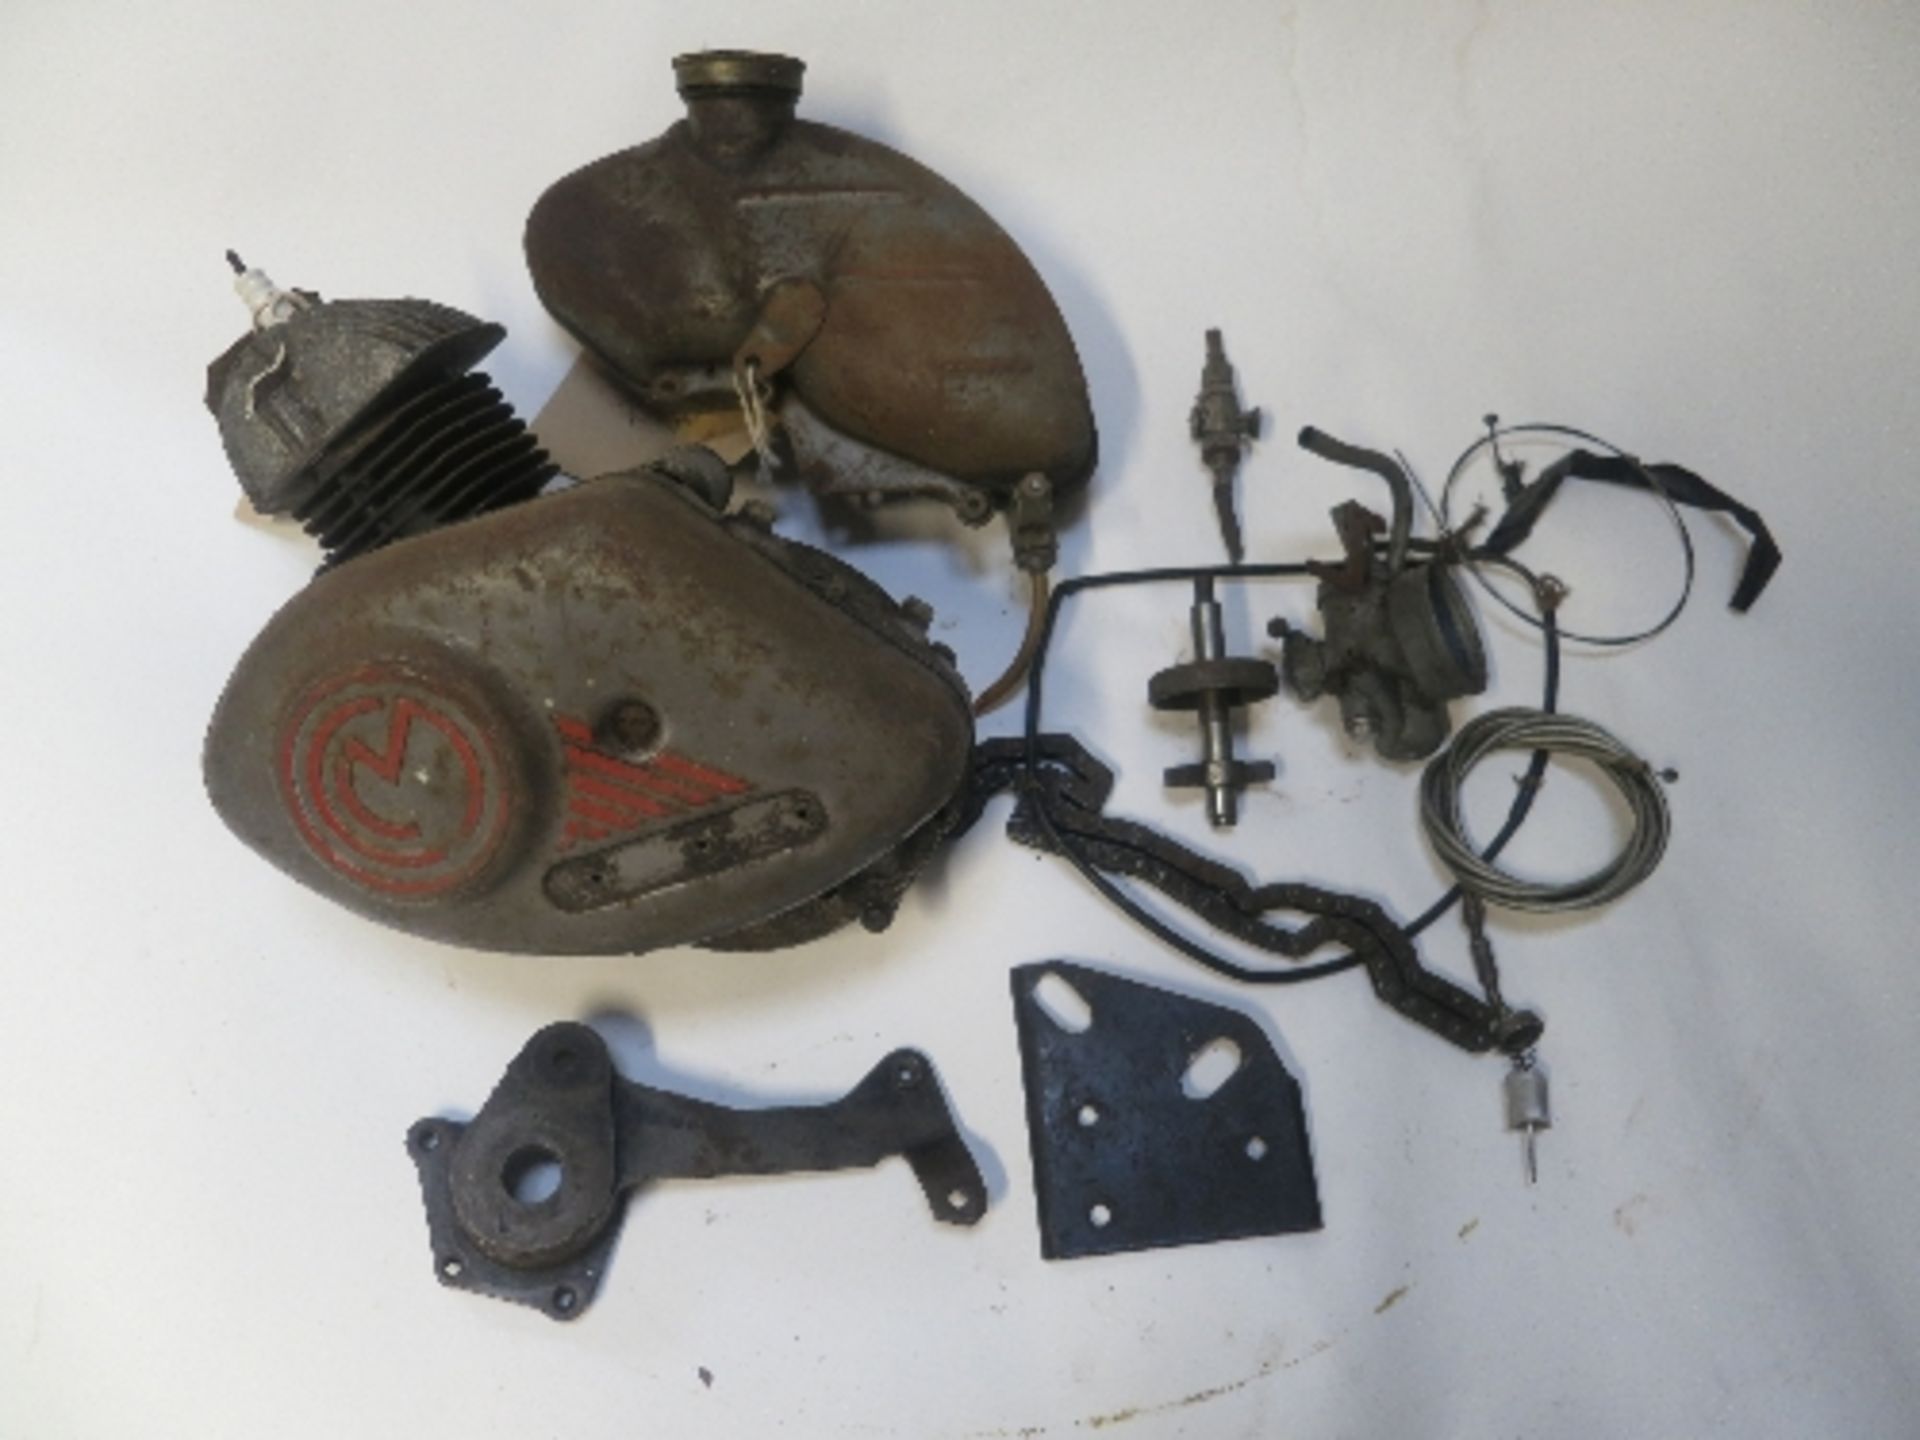 Cyclemaster engine, fuel tank and assorted other accessories